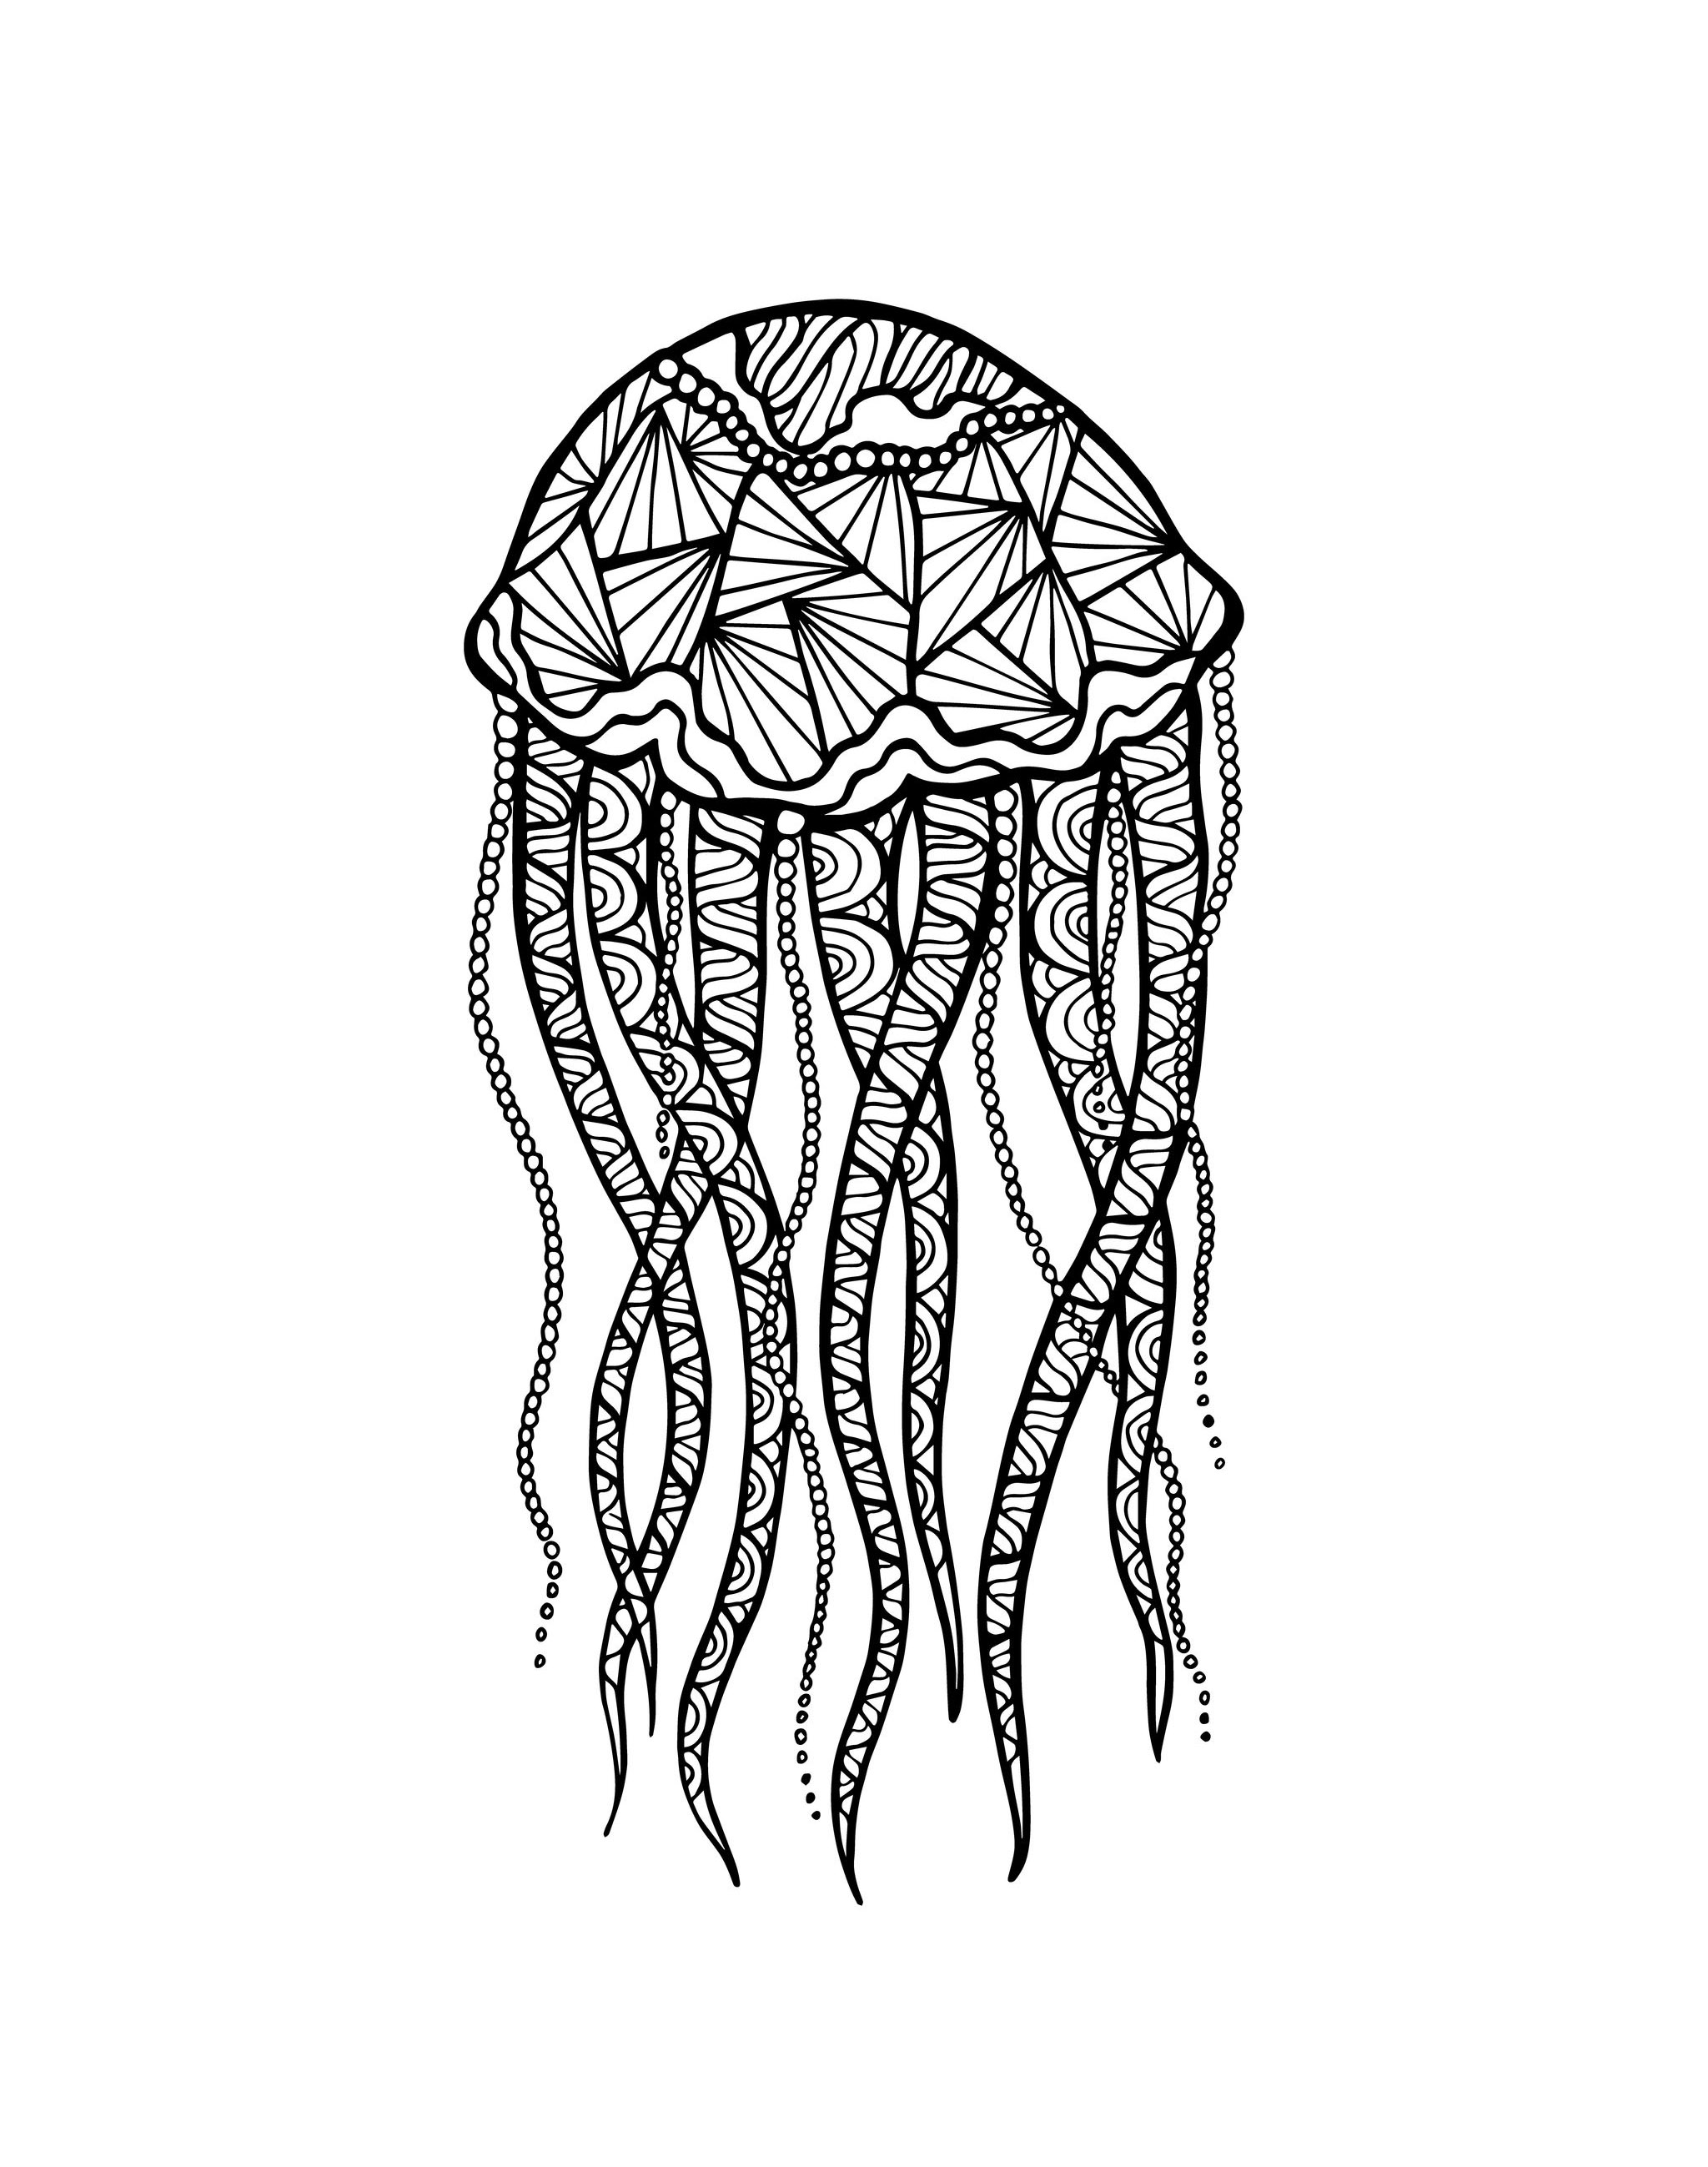 Original drawing of a jellyfish made with the Zen-tangle method, to color, by Meggichka (source: 123rf)